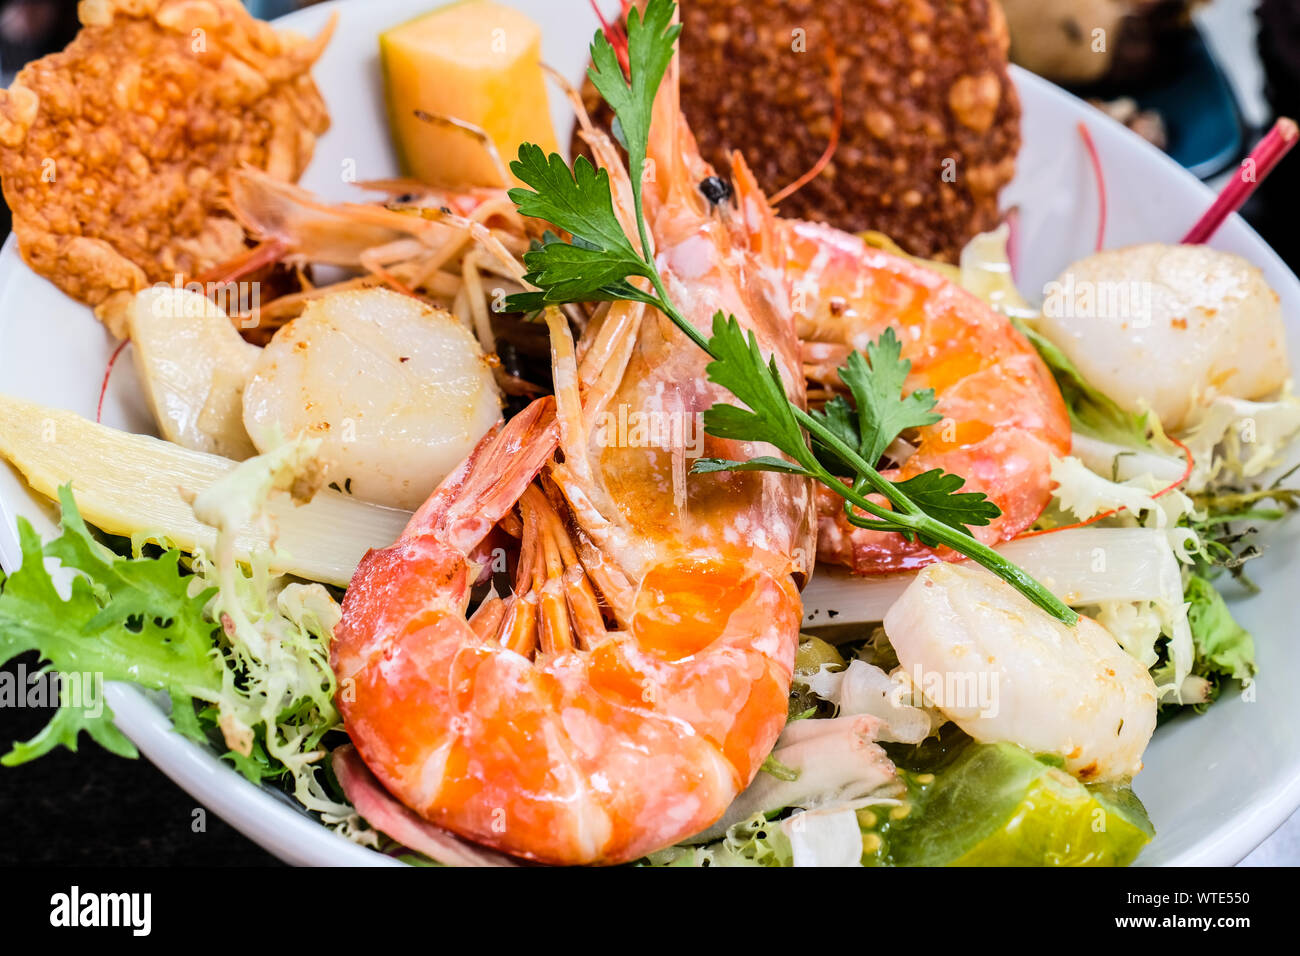 Fixed price menu in French restaurant in France Stock Photo